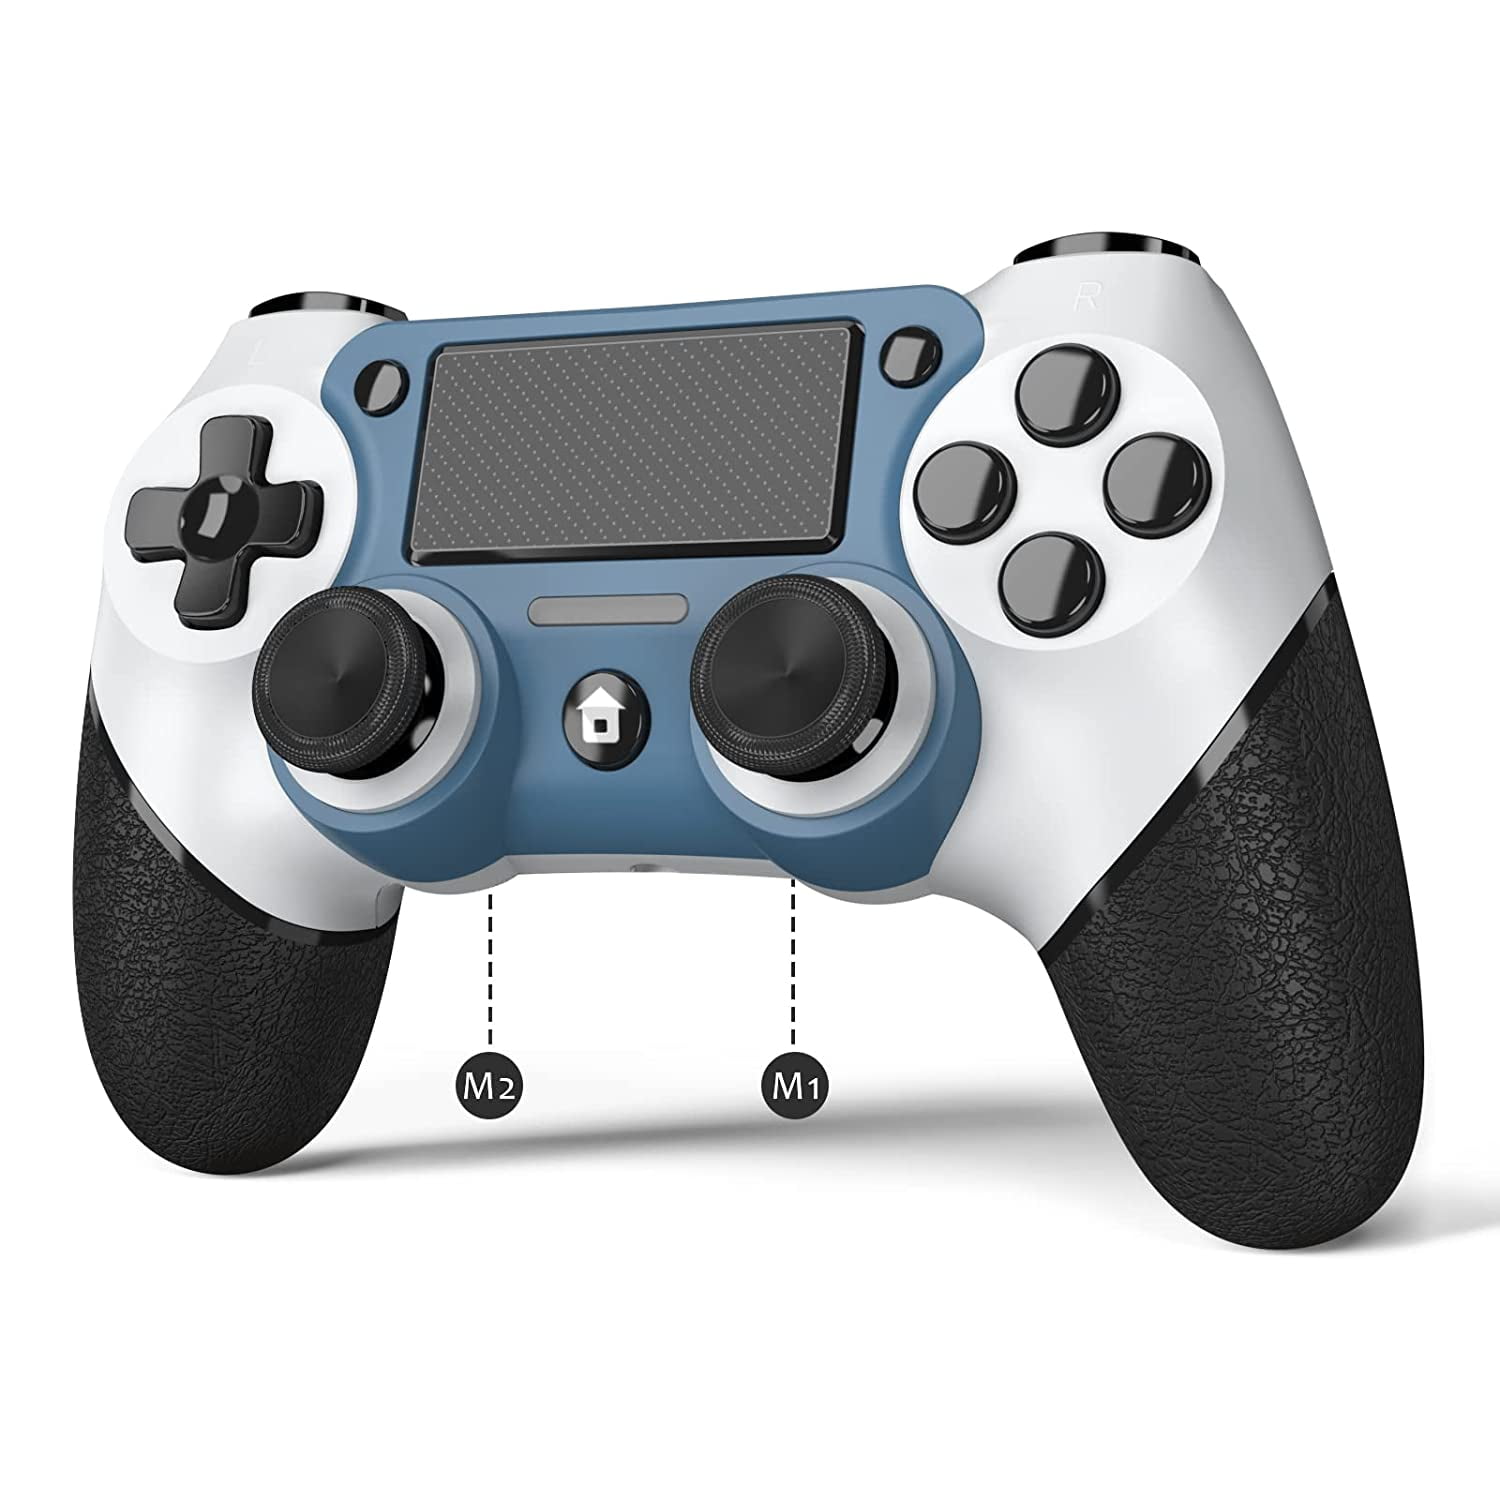 Custom Ps4 Controller Wireless,Scuf PS4 Gamepad with Remapping Buttons/Dual  Vibration/6-Axis Sensor/Touchpad/ Stereo Headset Jack,Turbo. 